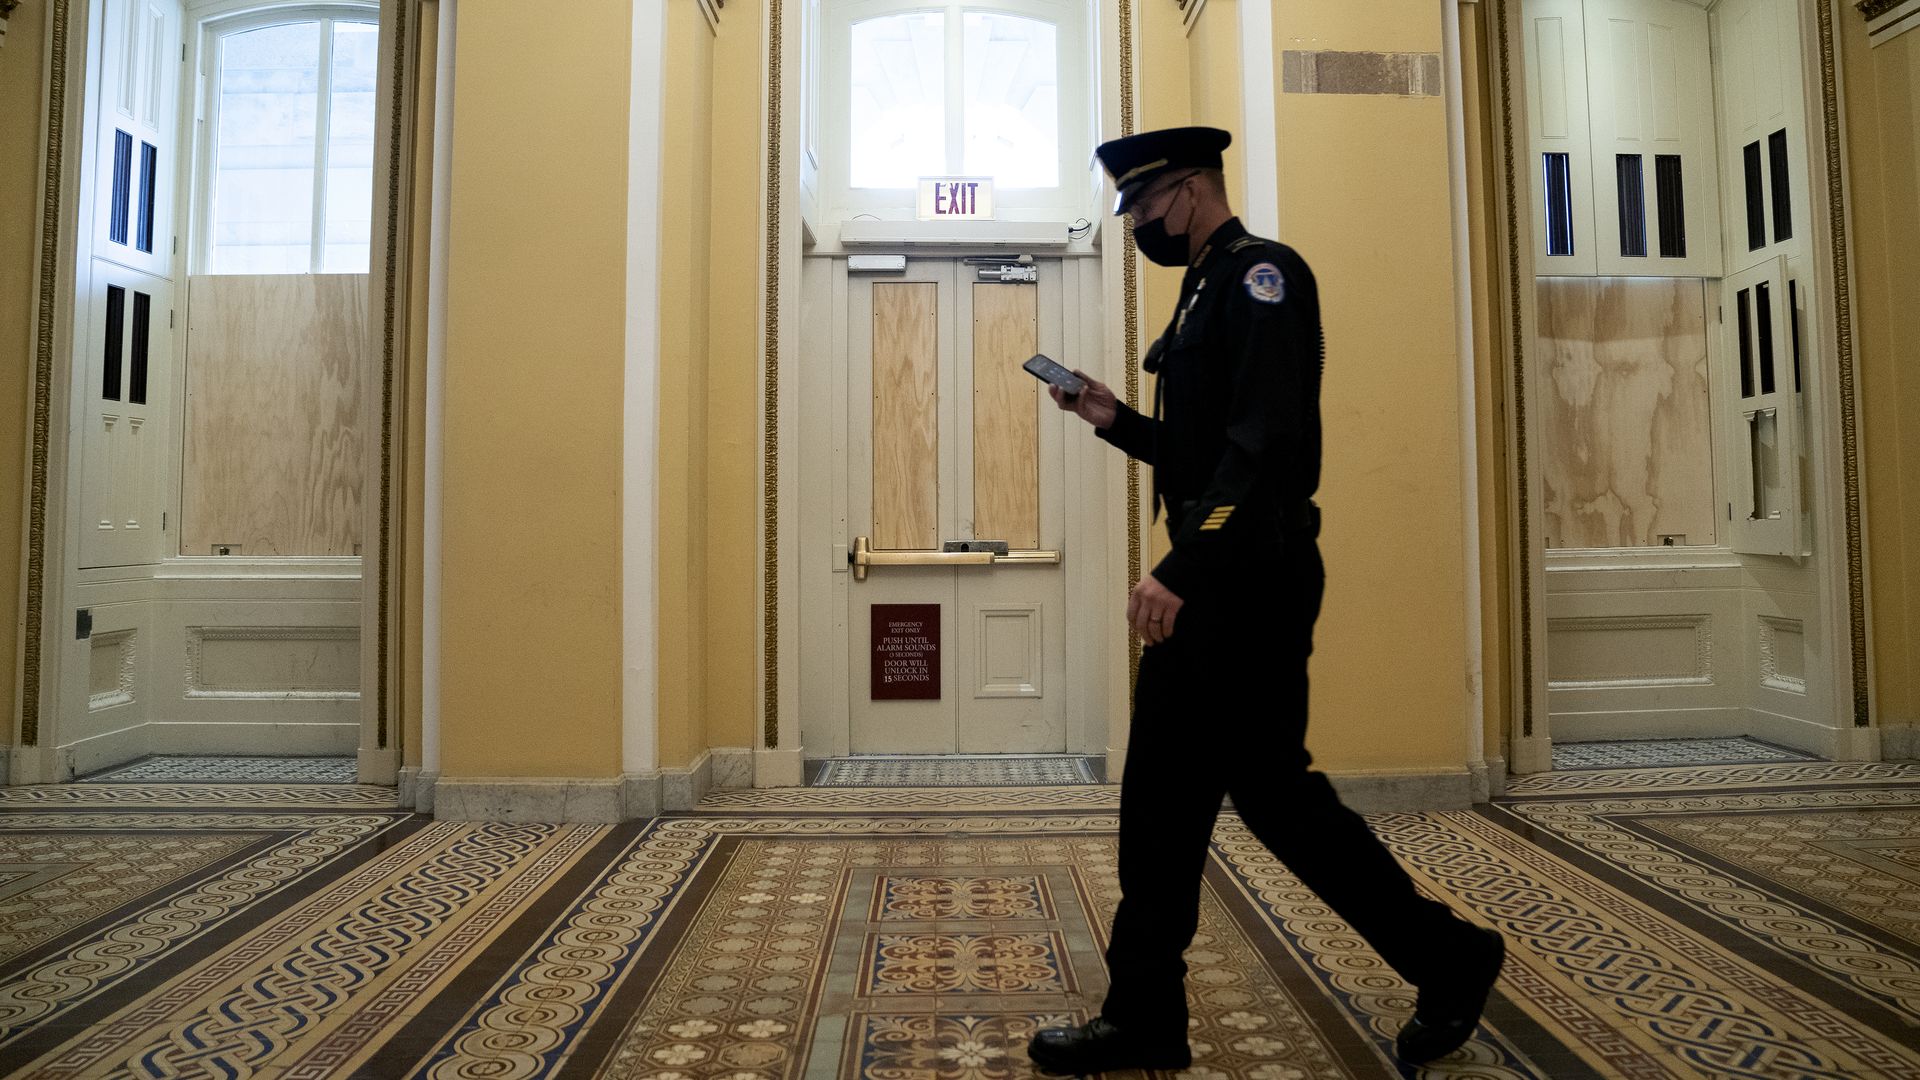 A Capitol Police officer is seen walking past boarded-up windows as he walks through the building.